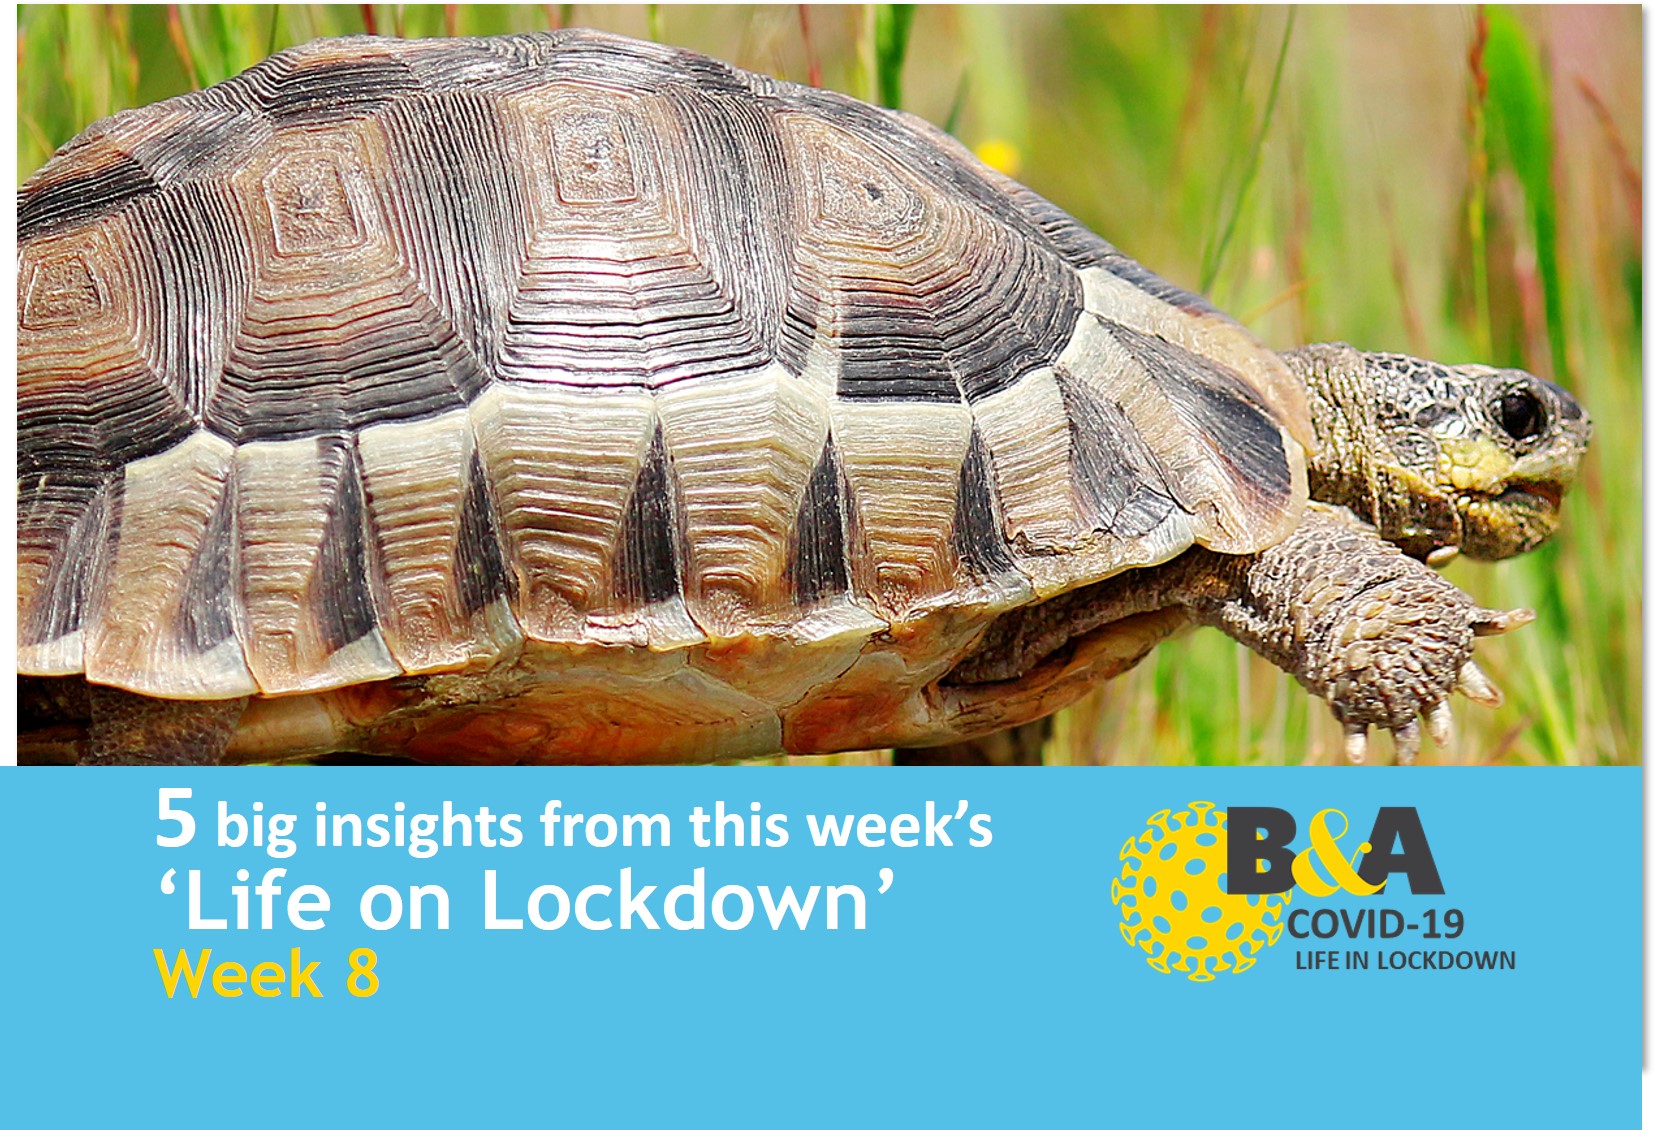 Week 8 of our 5 big insights from ‘Life on Lockdown’